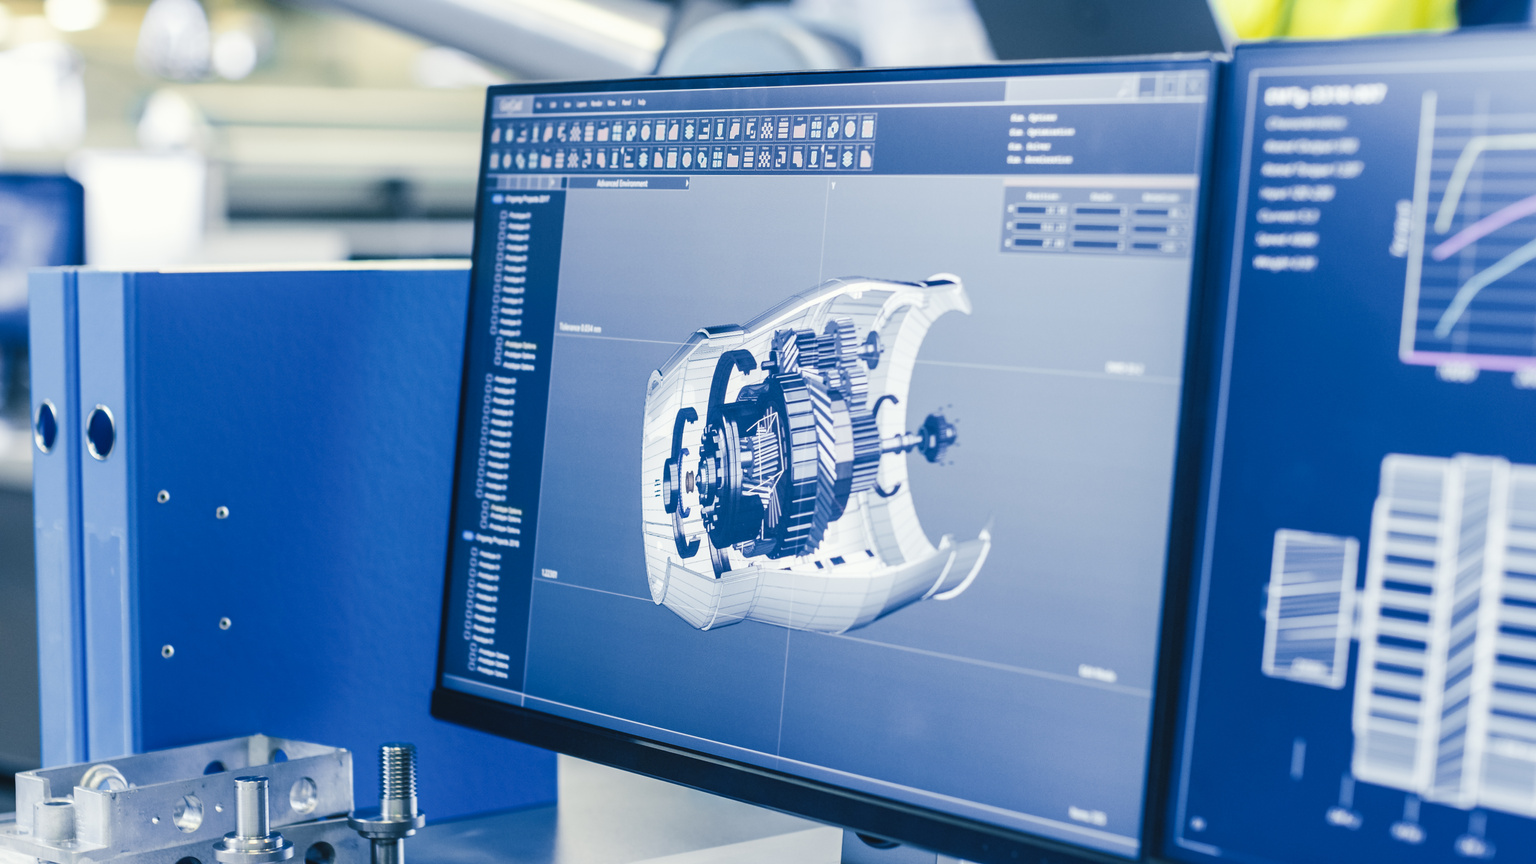 Close-up Shot of the 3D CAD Model of the Engine Shown on Computer Screen. In the Background Manufacturing Factory with People Working.